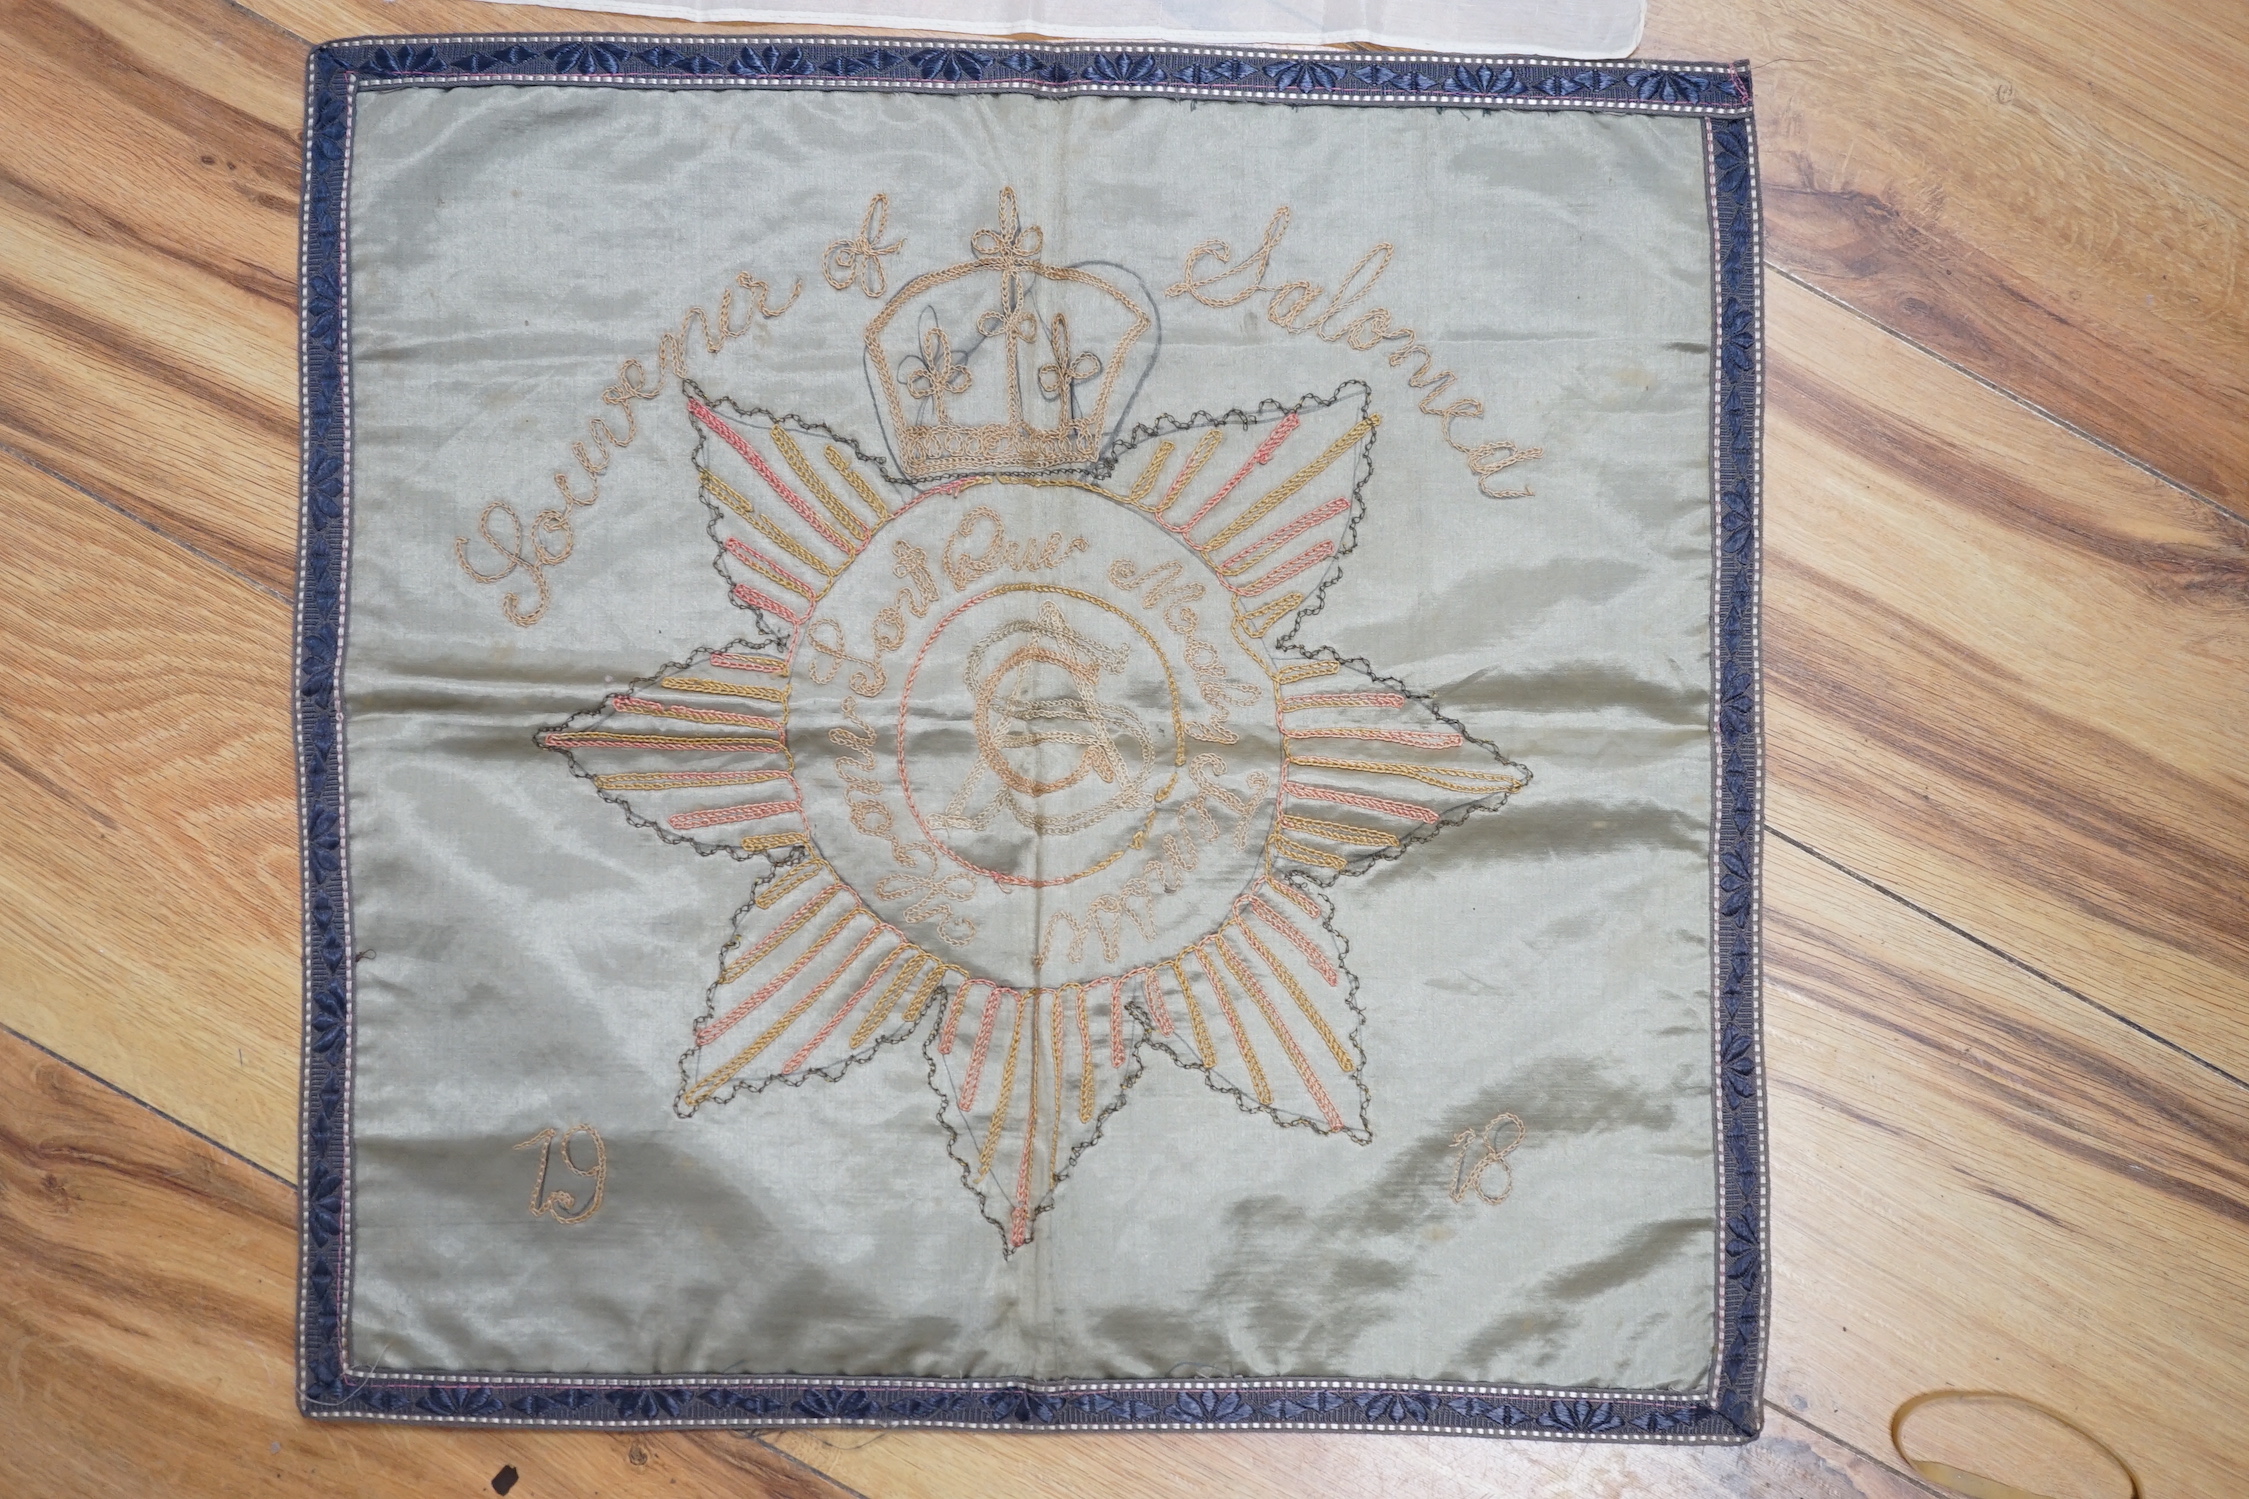 A WWII silk printed handkerchief; ‘Nippon Times’ commemorating the surrender of the Japanese, together with a WWI Army Service Corps emblem dated 1918, 44 x 45cm